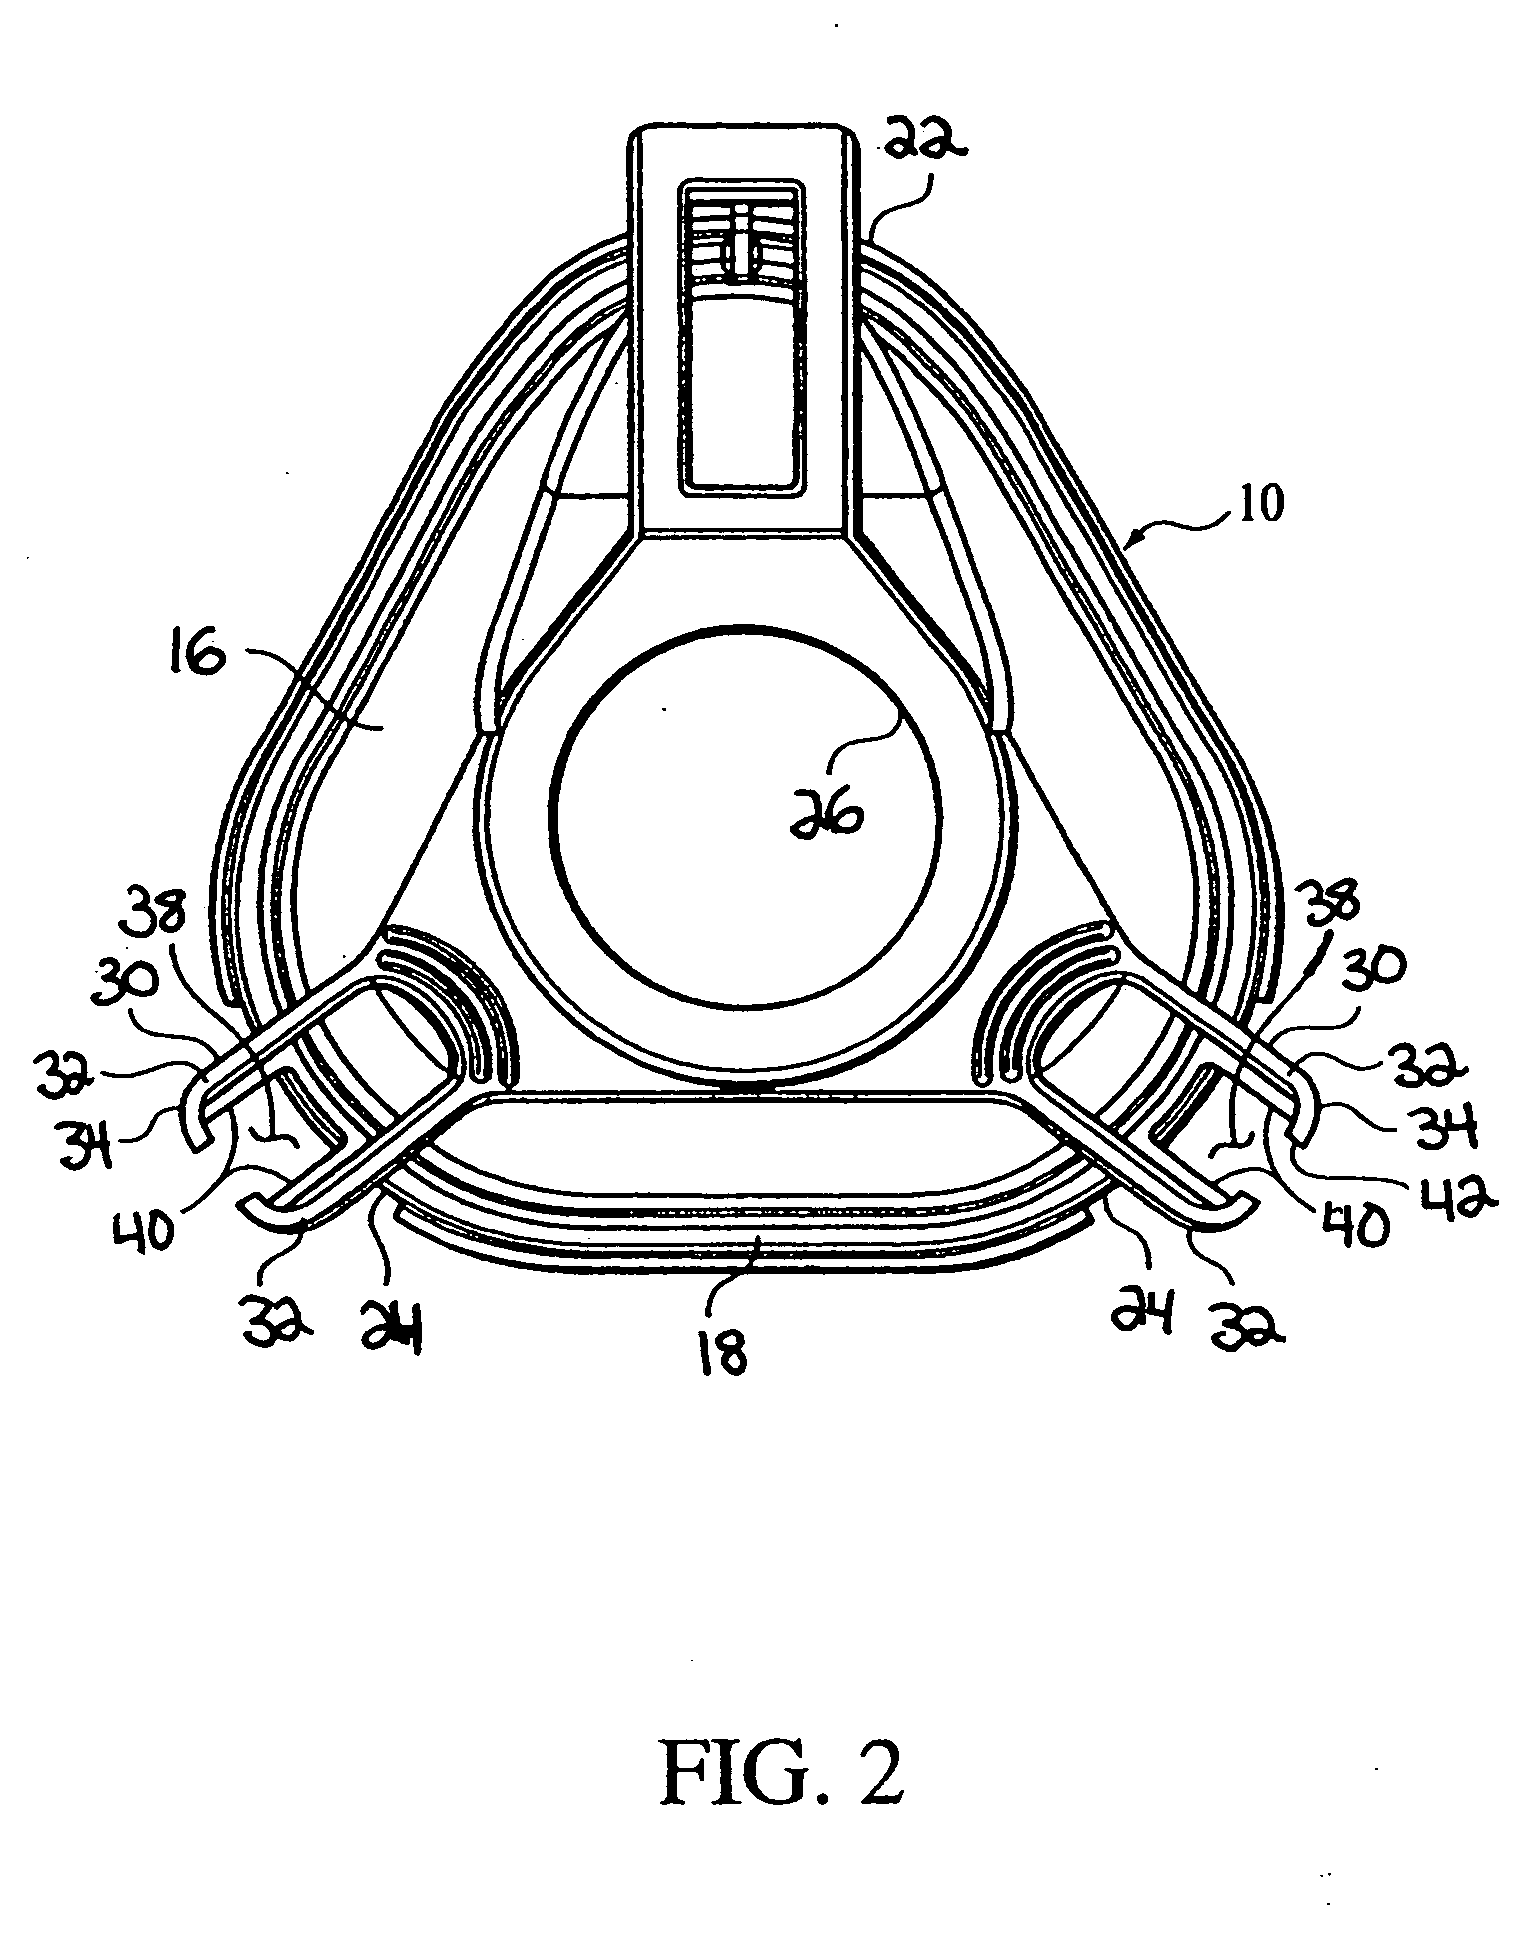 Patient interface and headgear connector